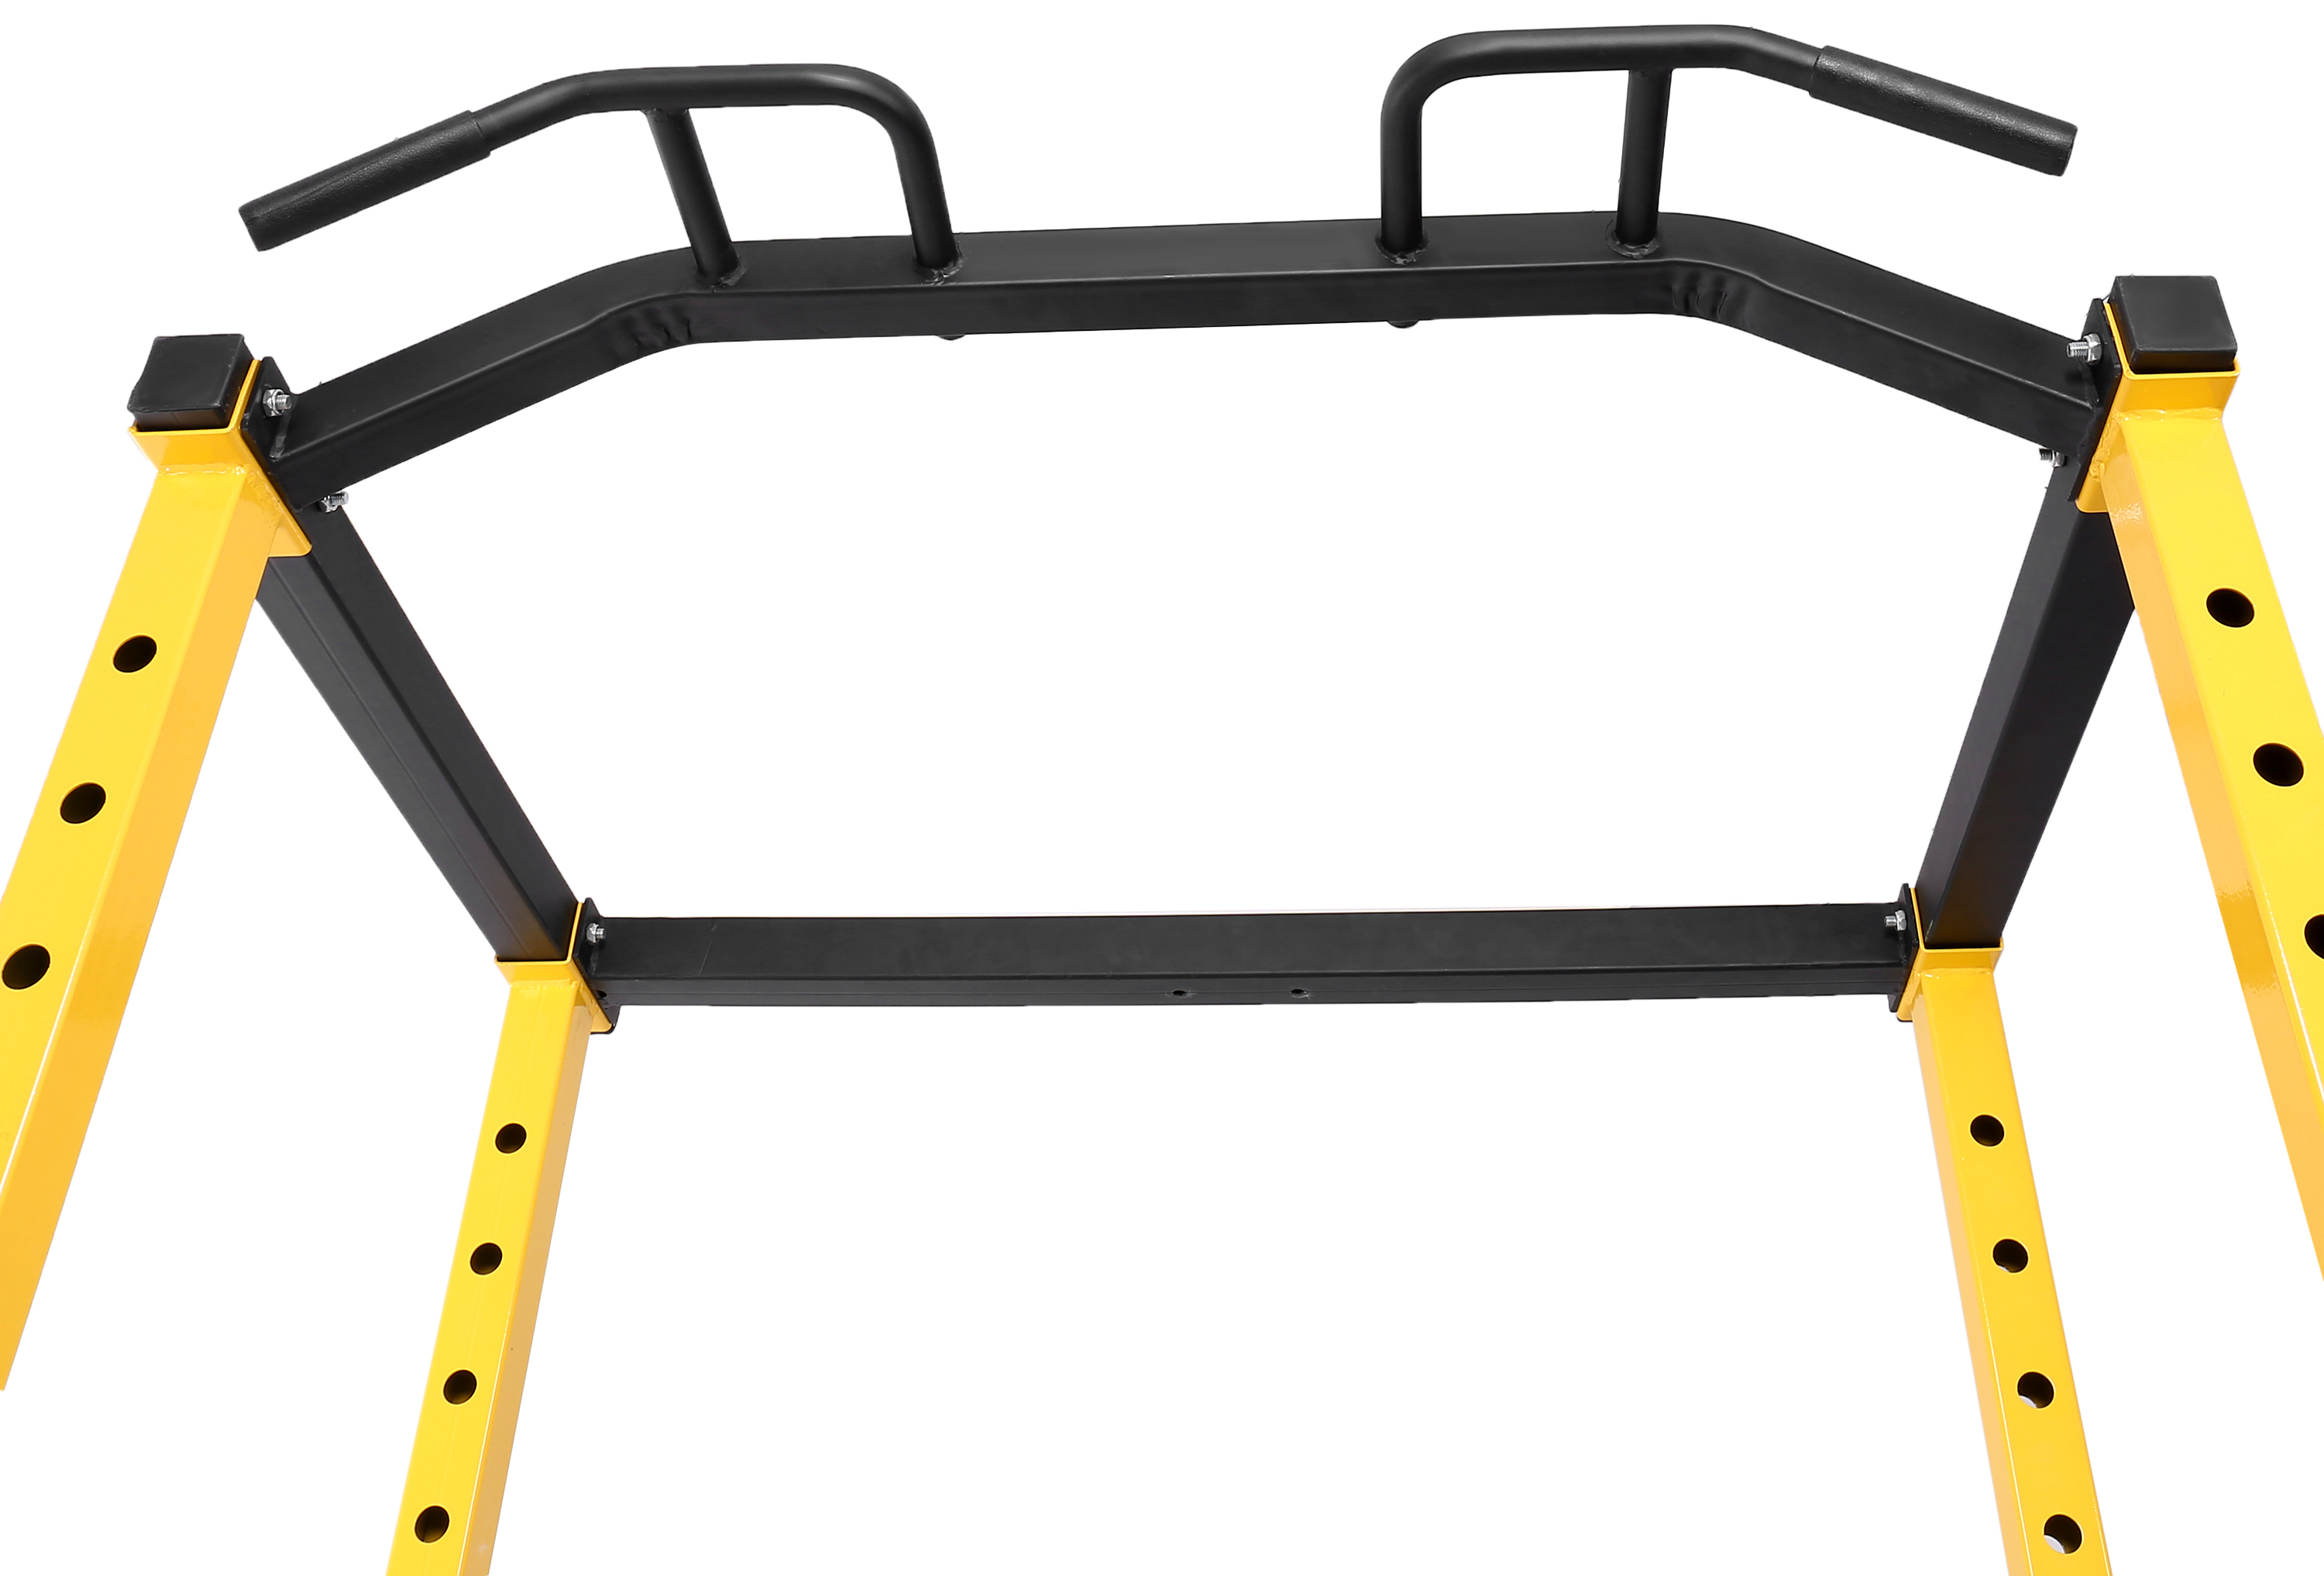 HulkFit Multi-Function Adjustable Power Cage with J-Hooks, Safety Bars or Safety Straps, Power Cage Only, Yellow - image 5 of 5